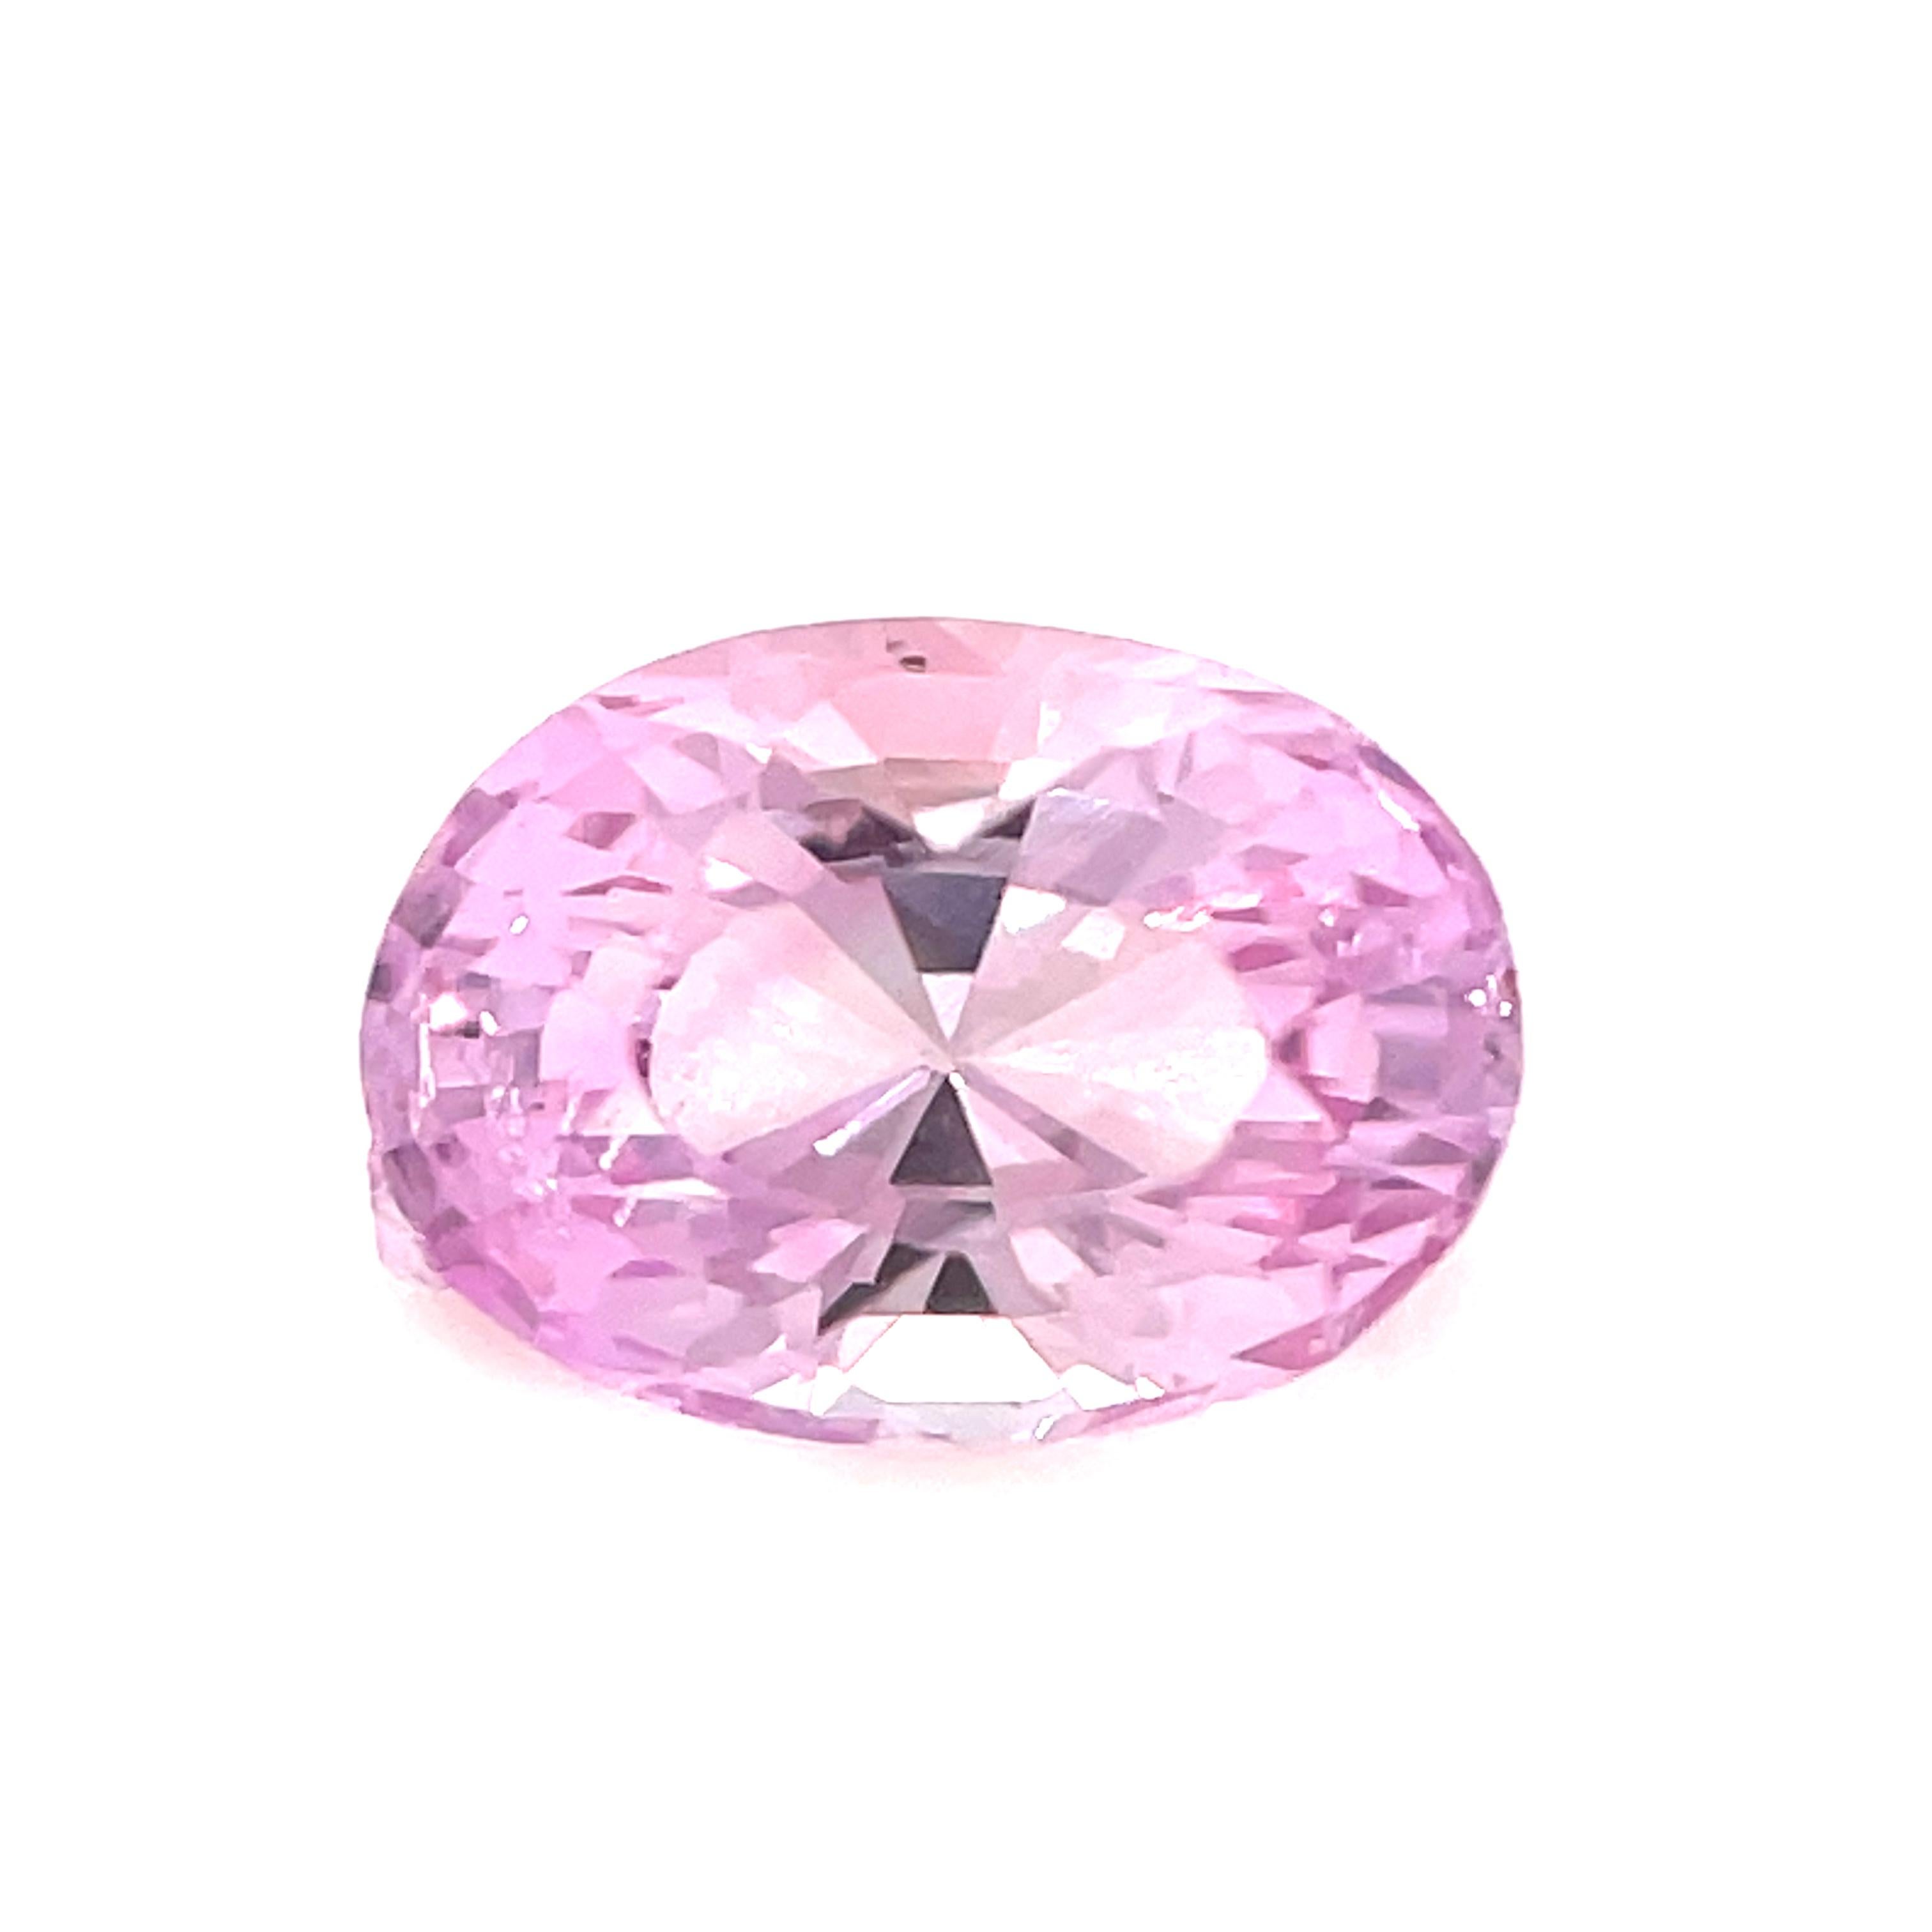 This sparkling cherry blossom pink sapphire will make a gorgeous ring or pendant! Weighing 1.04 carat and measuring 6.83 x 4.83 millimeters, it is a beautiful and affordable center stone that would look gorgeous set with diamonds or other colored